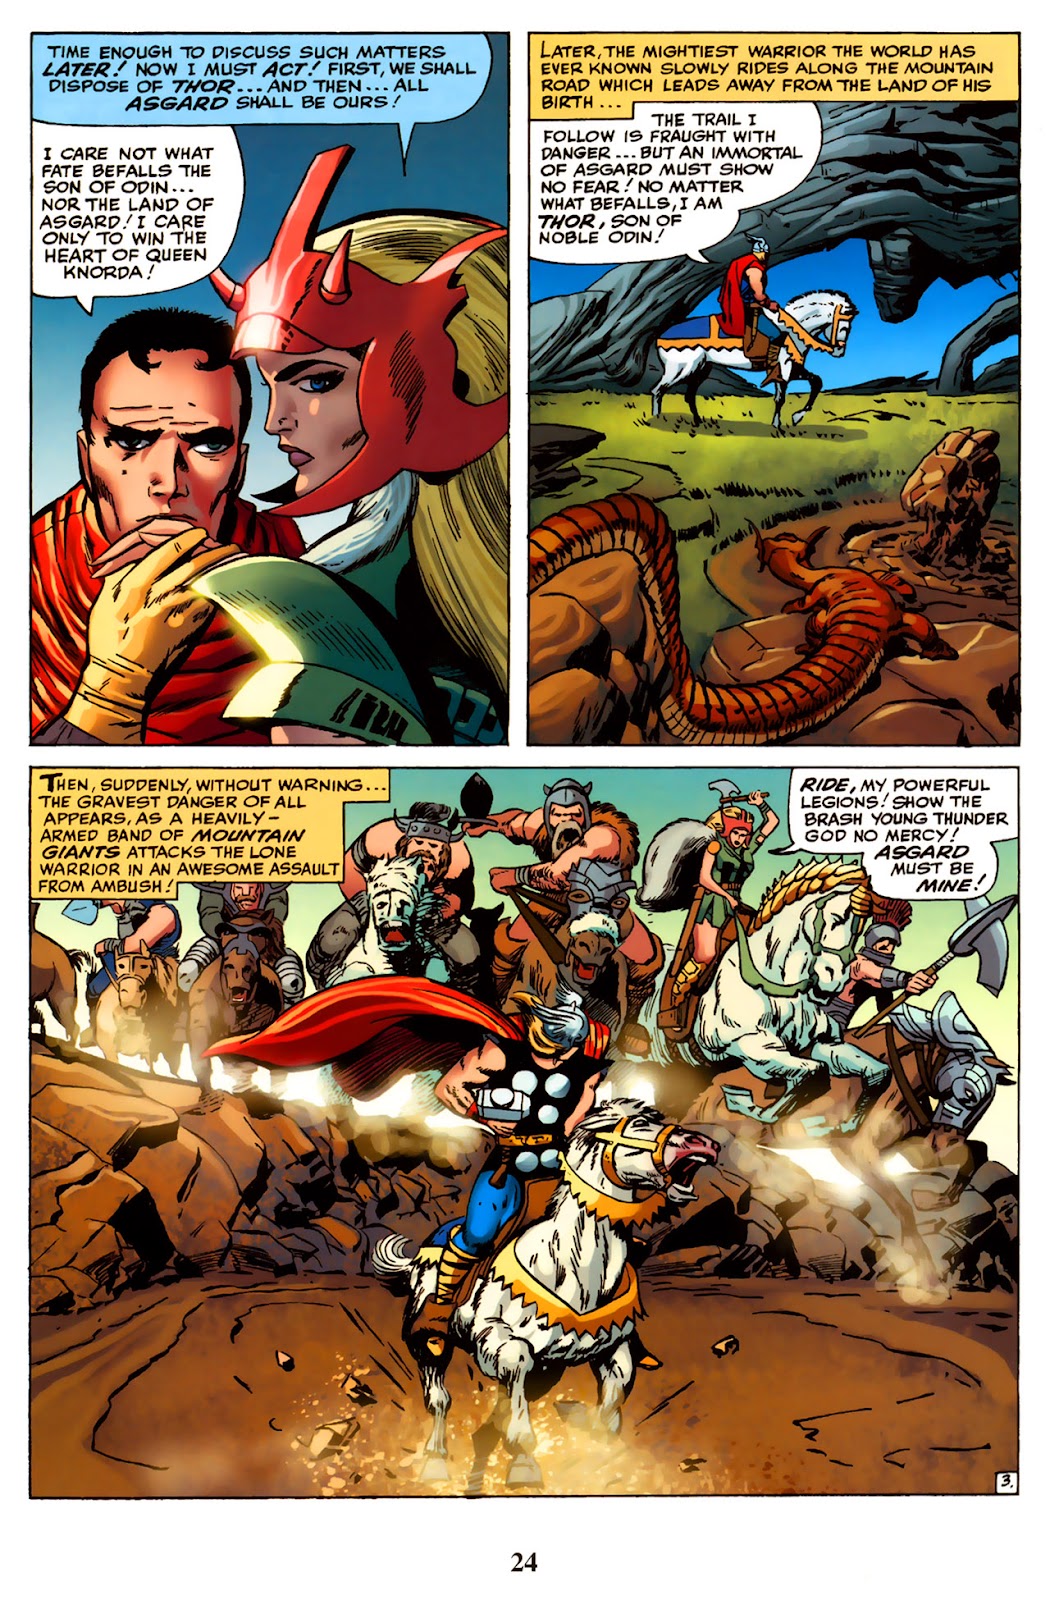 Thor: Tales of Asgard by Stan Lee & Jack Kirby issue 2 - Page 26